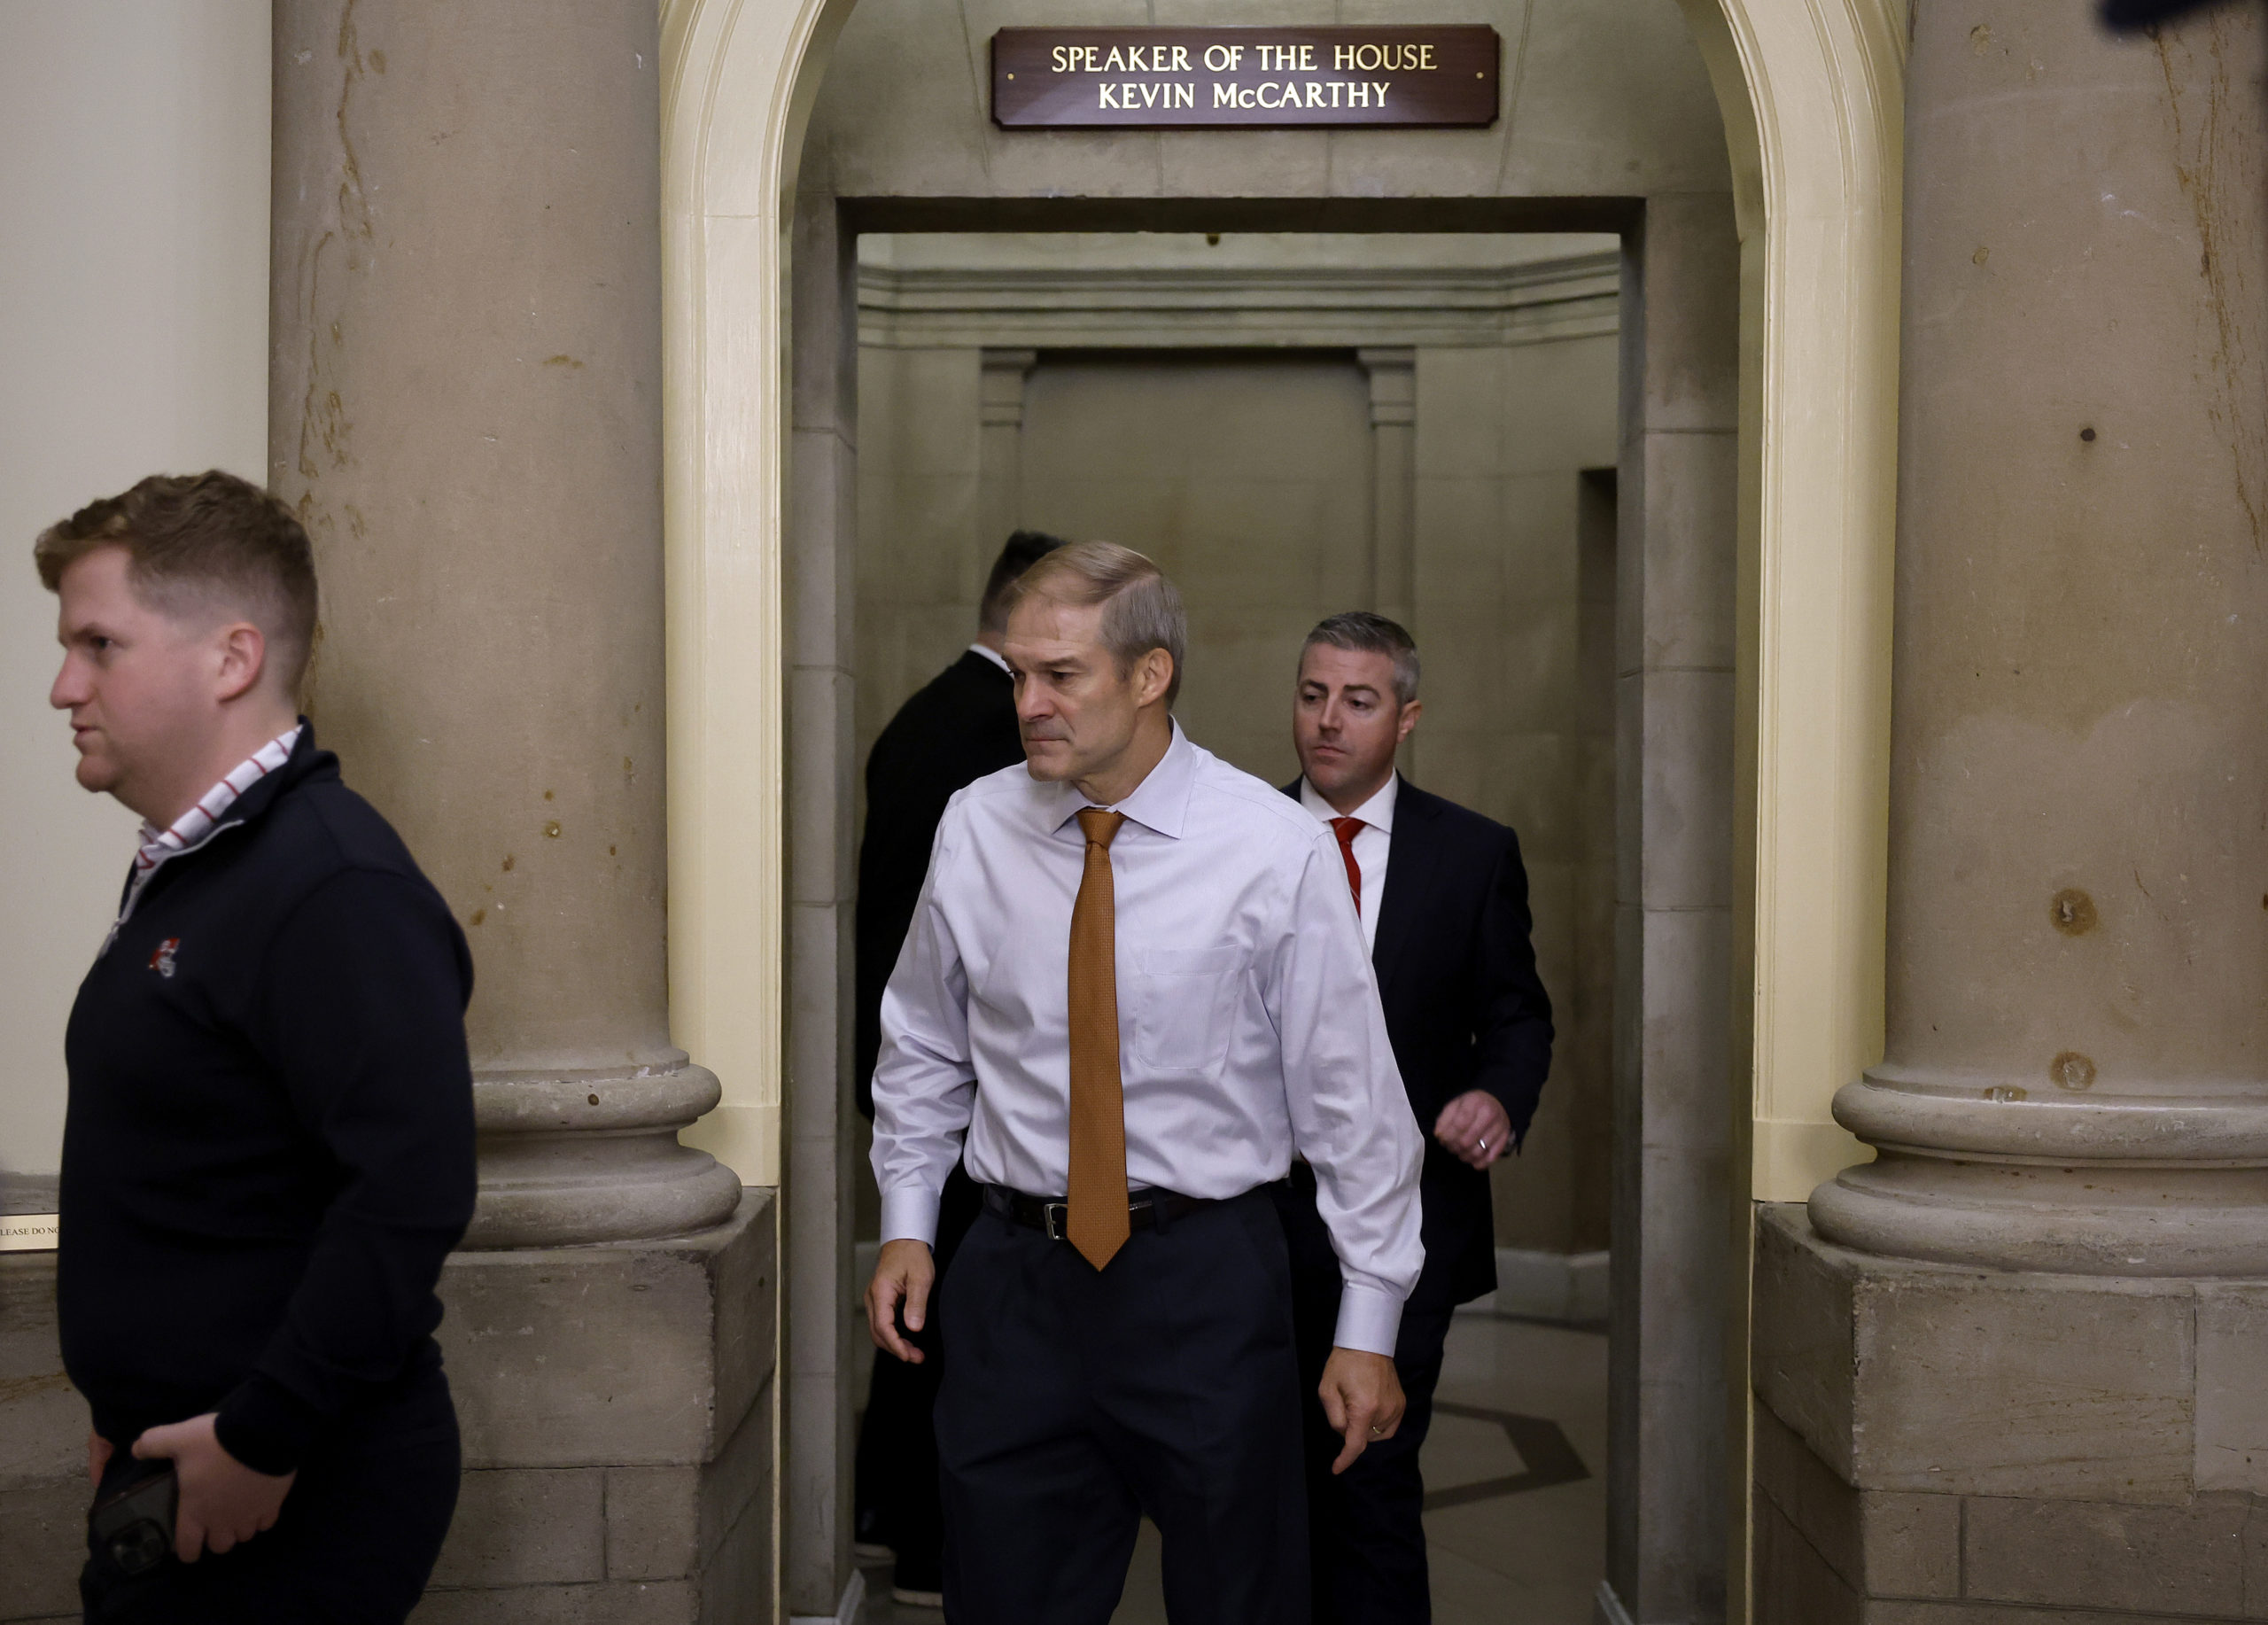 WASHINGTON, DC - OCTOBER 04: House Judiciary Committee Chairman Jim Jordan (R-OH) walks out of the offices of former Speaker of the House Kevin McCarthy (R-CA) as he heads to the House Chamber at the U.S. Capitol on October 04, 2023 in Washington, DC. Jordan announced that he is stepping into the race to replace McCarthy, who was ousted from the speakership on October 3 by a group of conservative members of his own Republican party along with all the Democratic members of the House of Representatives. (Photo by Chip Somodevilla/Getty Images)